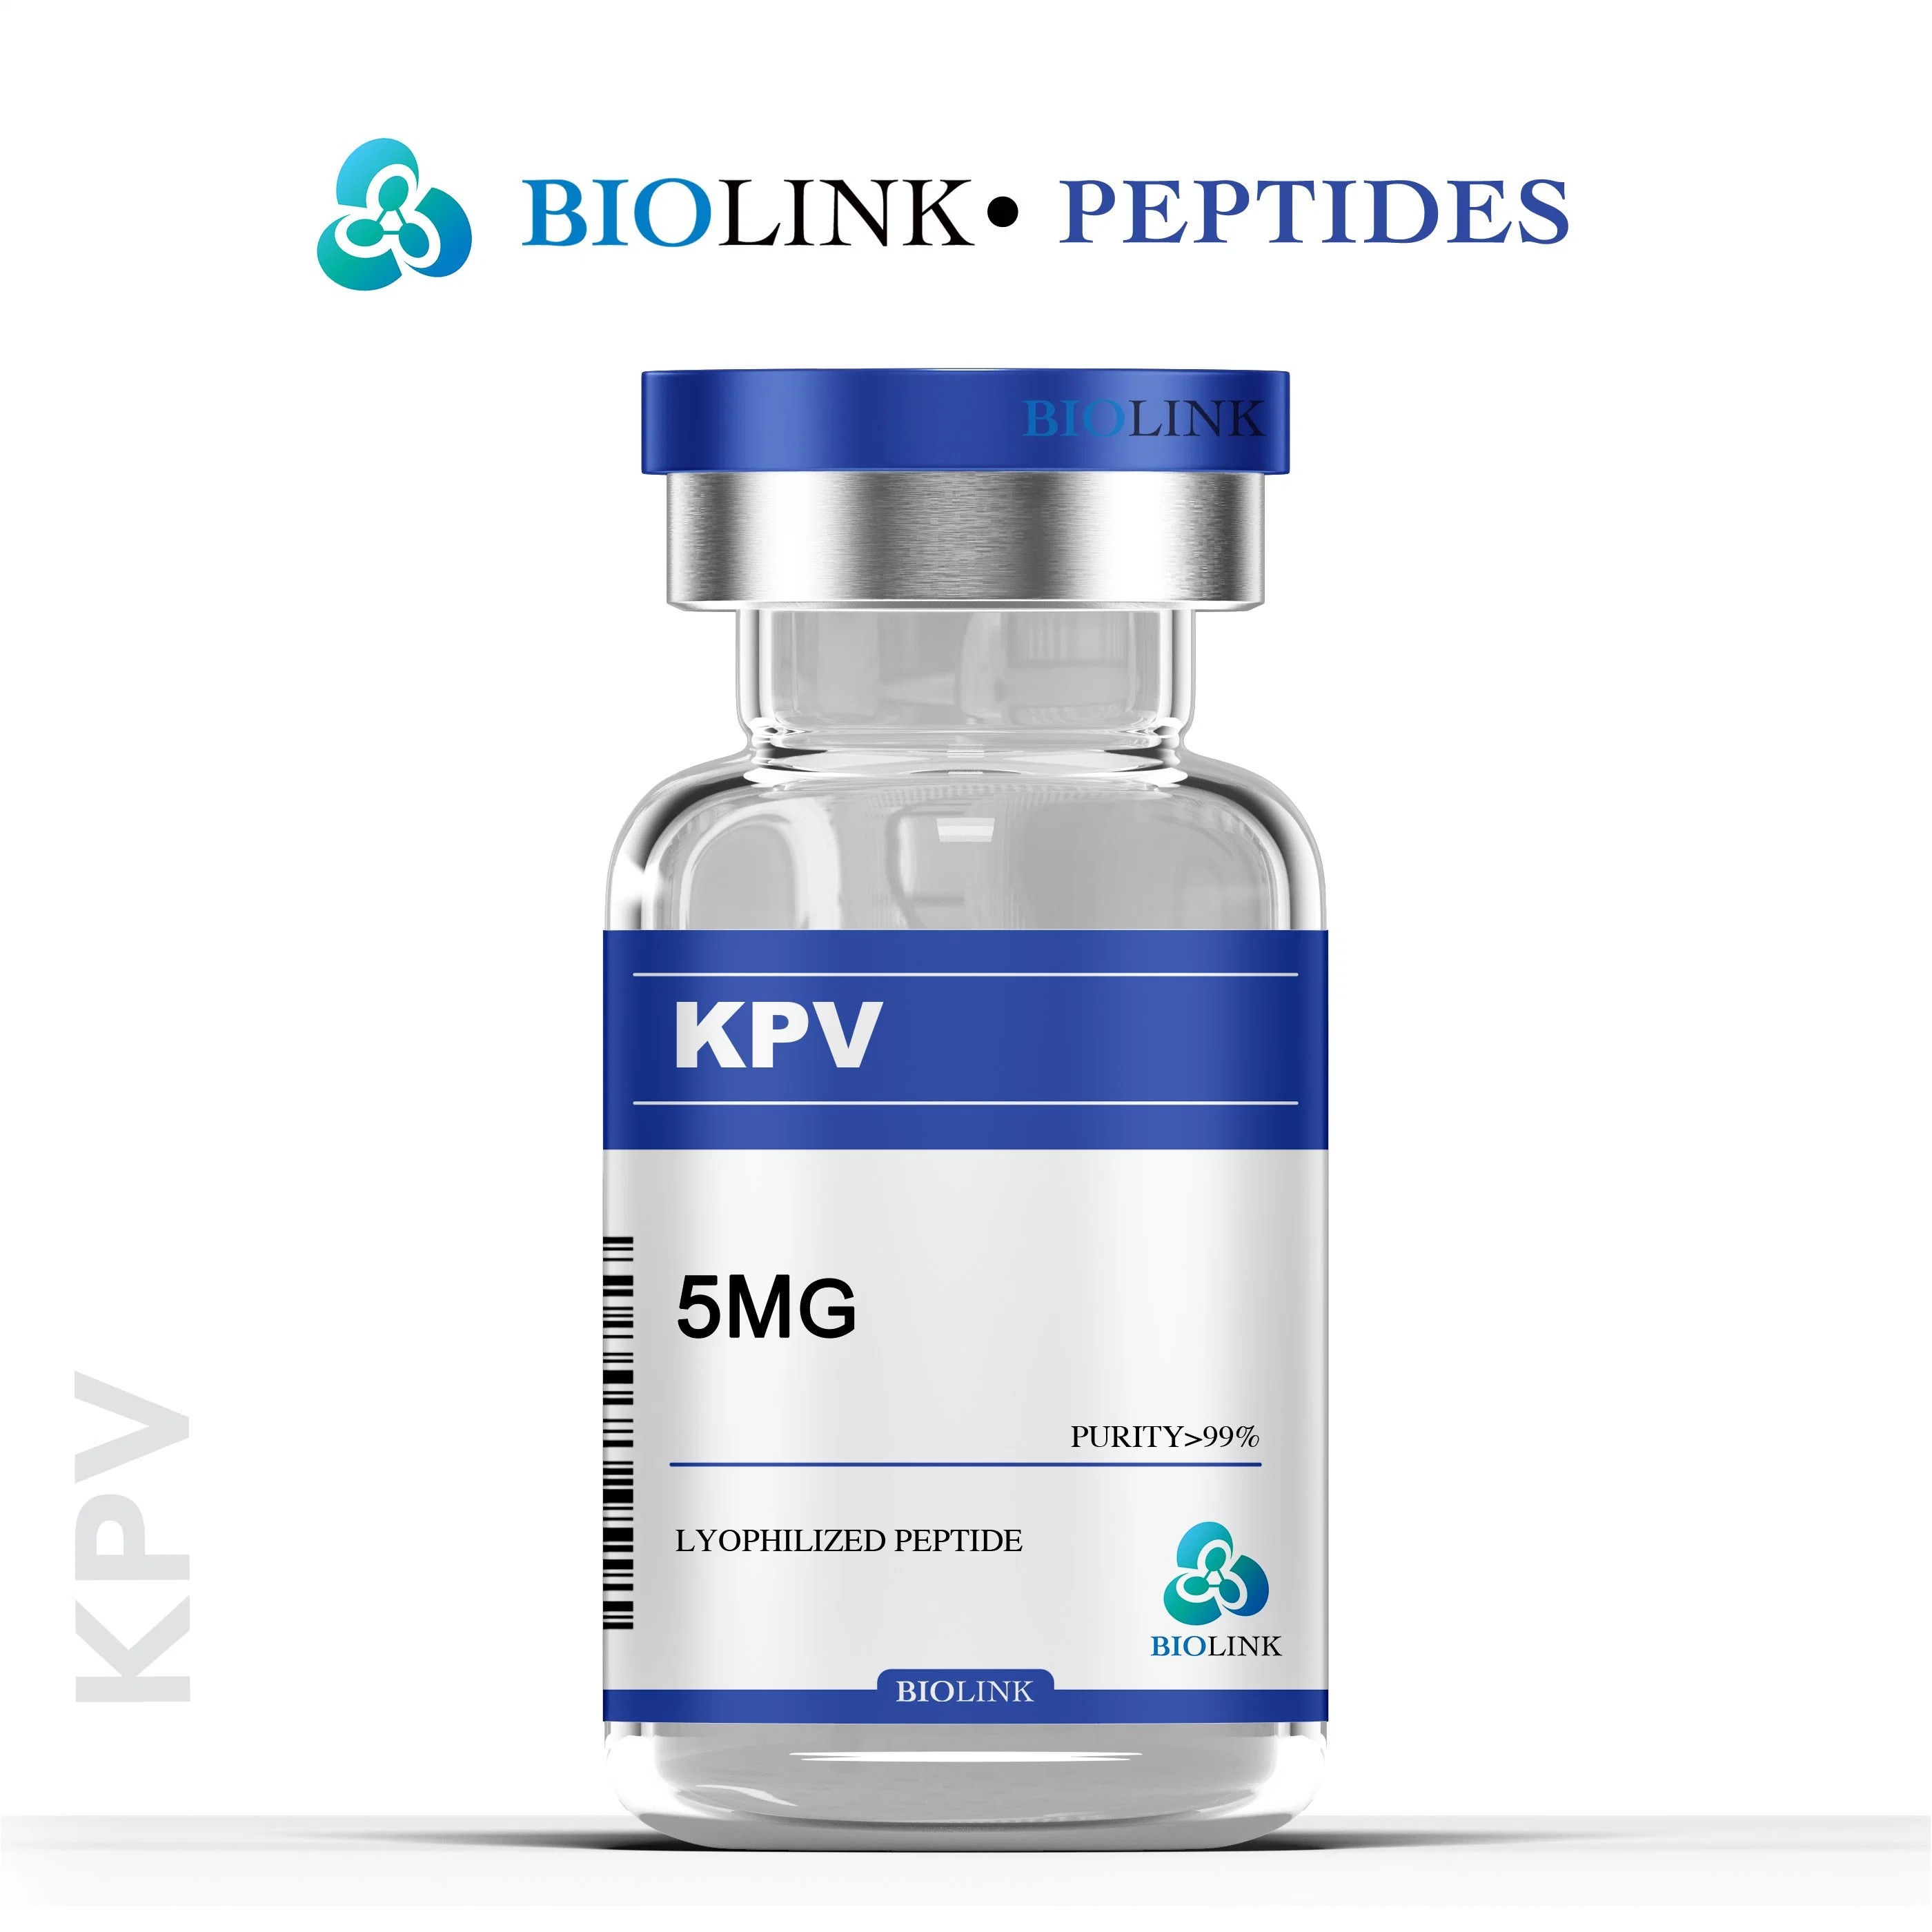 Biolink Peptides Wholesale/Suppliers Bacteriostatic Water Lyophilized Peptides Customized Label Free Support Europe